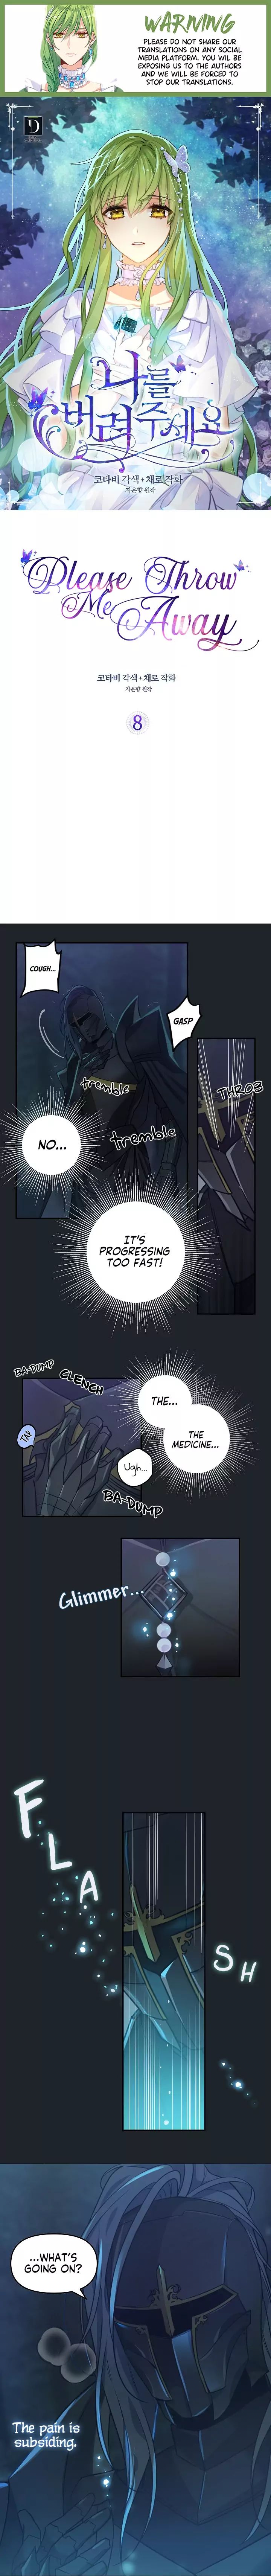 Please Throw Me Away - Chapter 8 Page 1